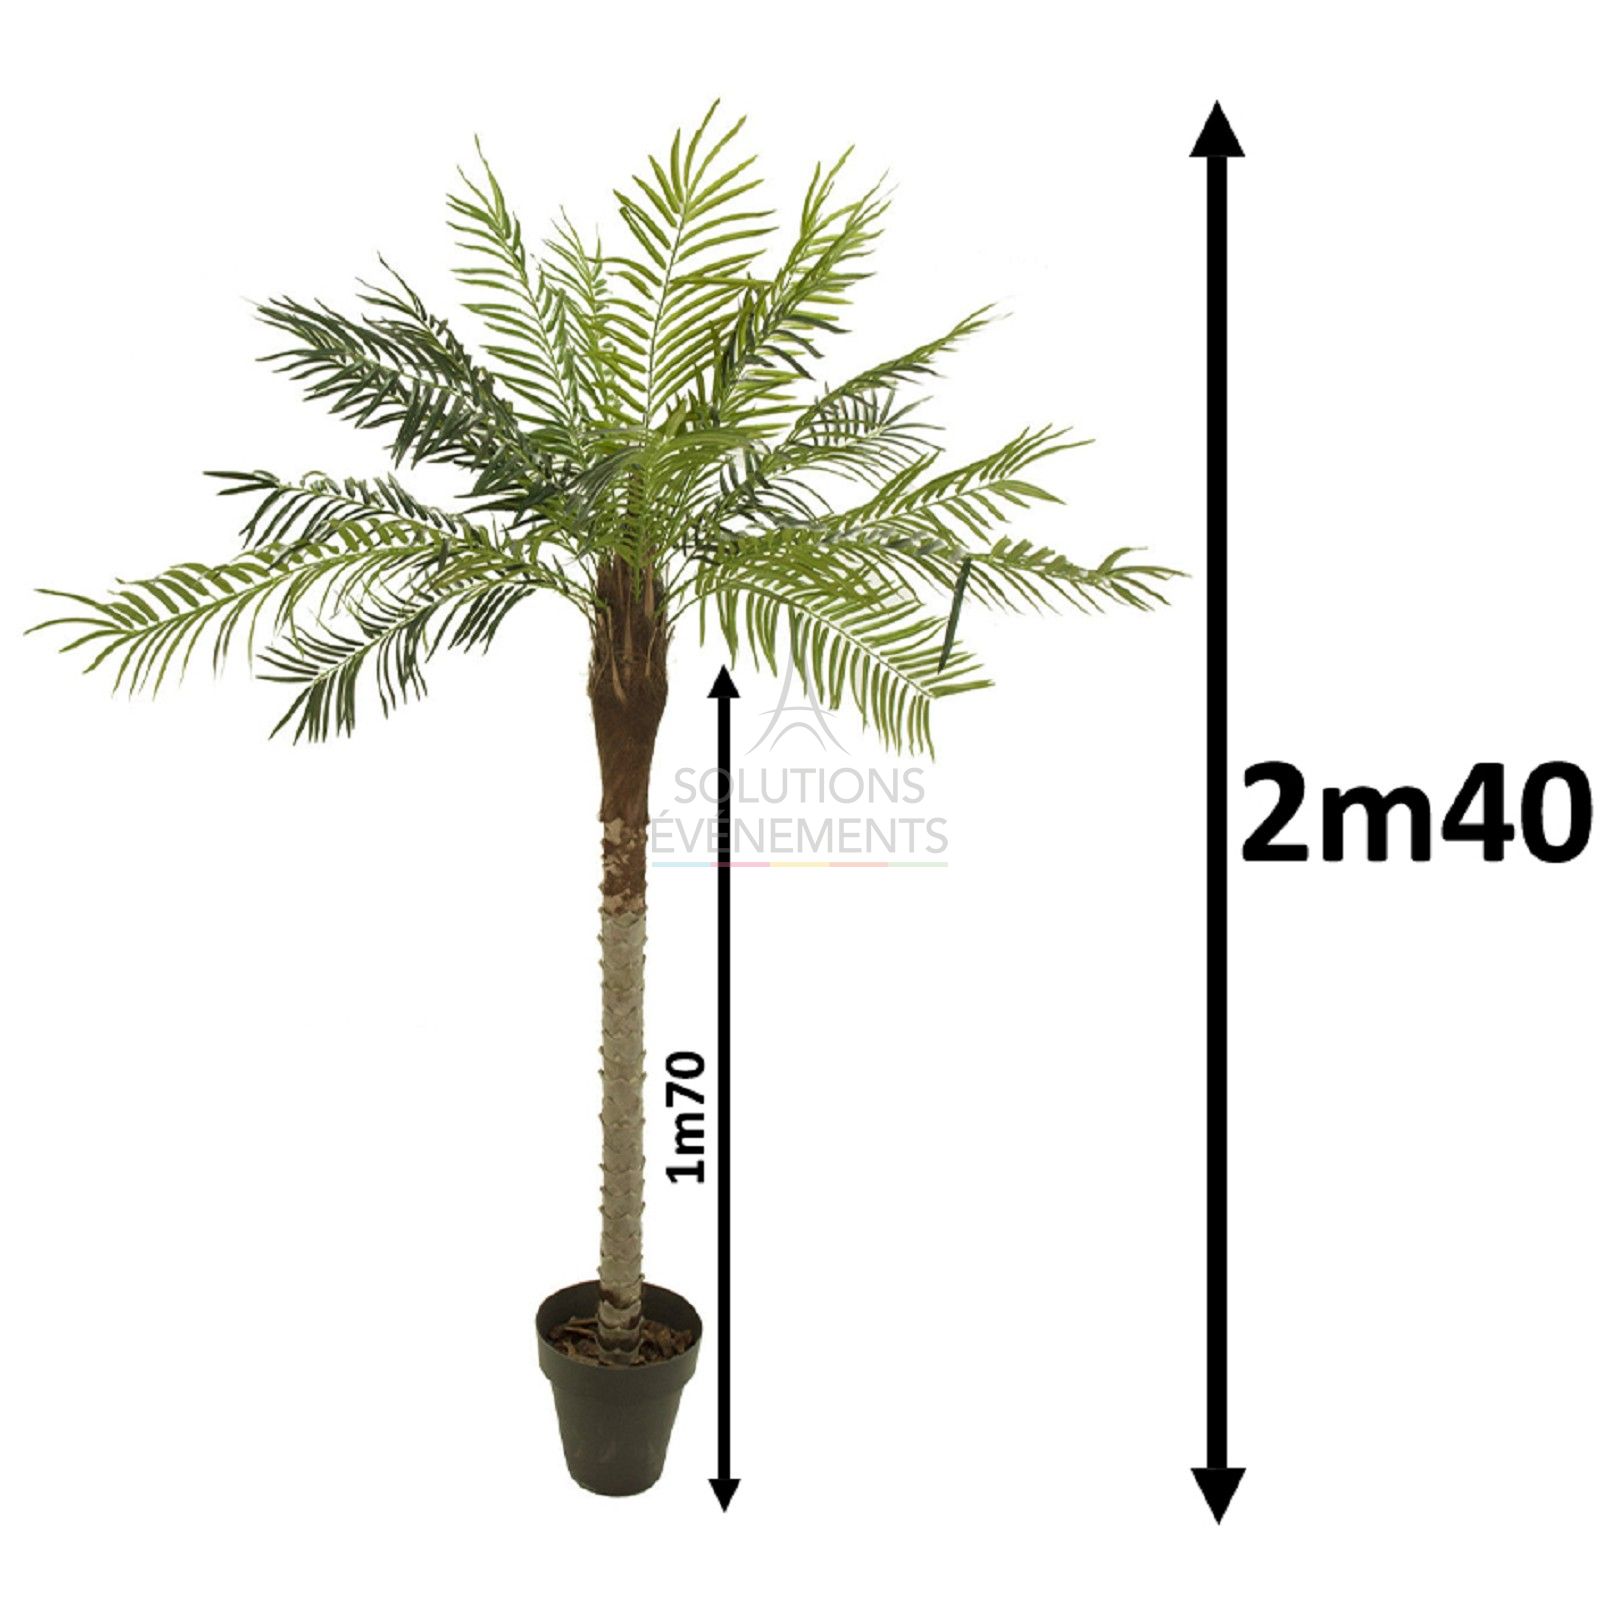 Rental of palm trees with a height of 2m40